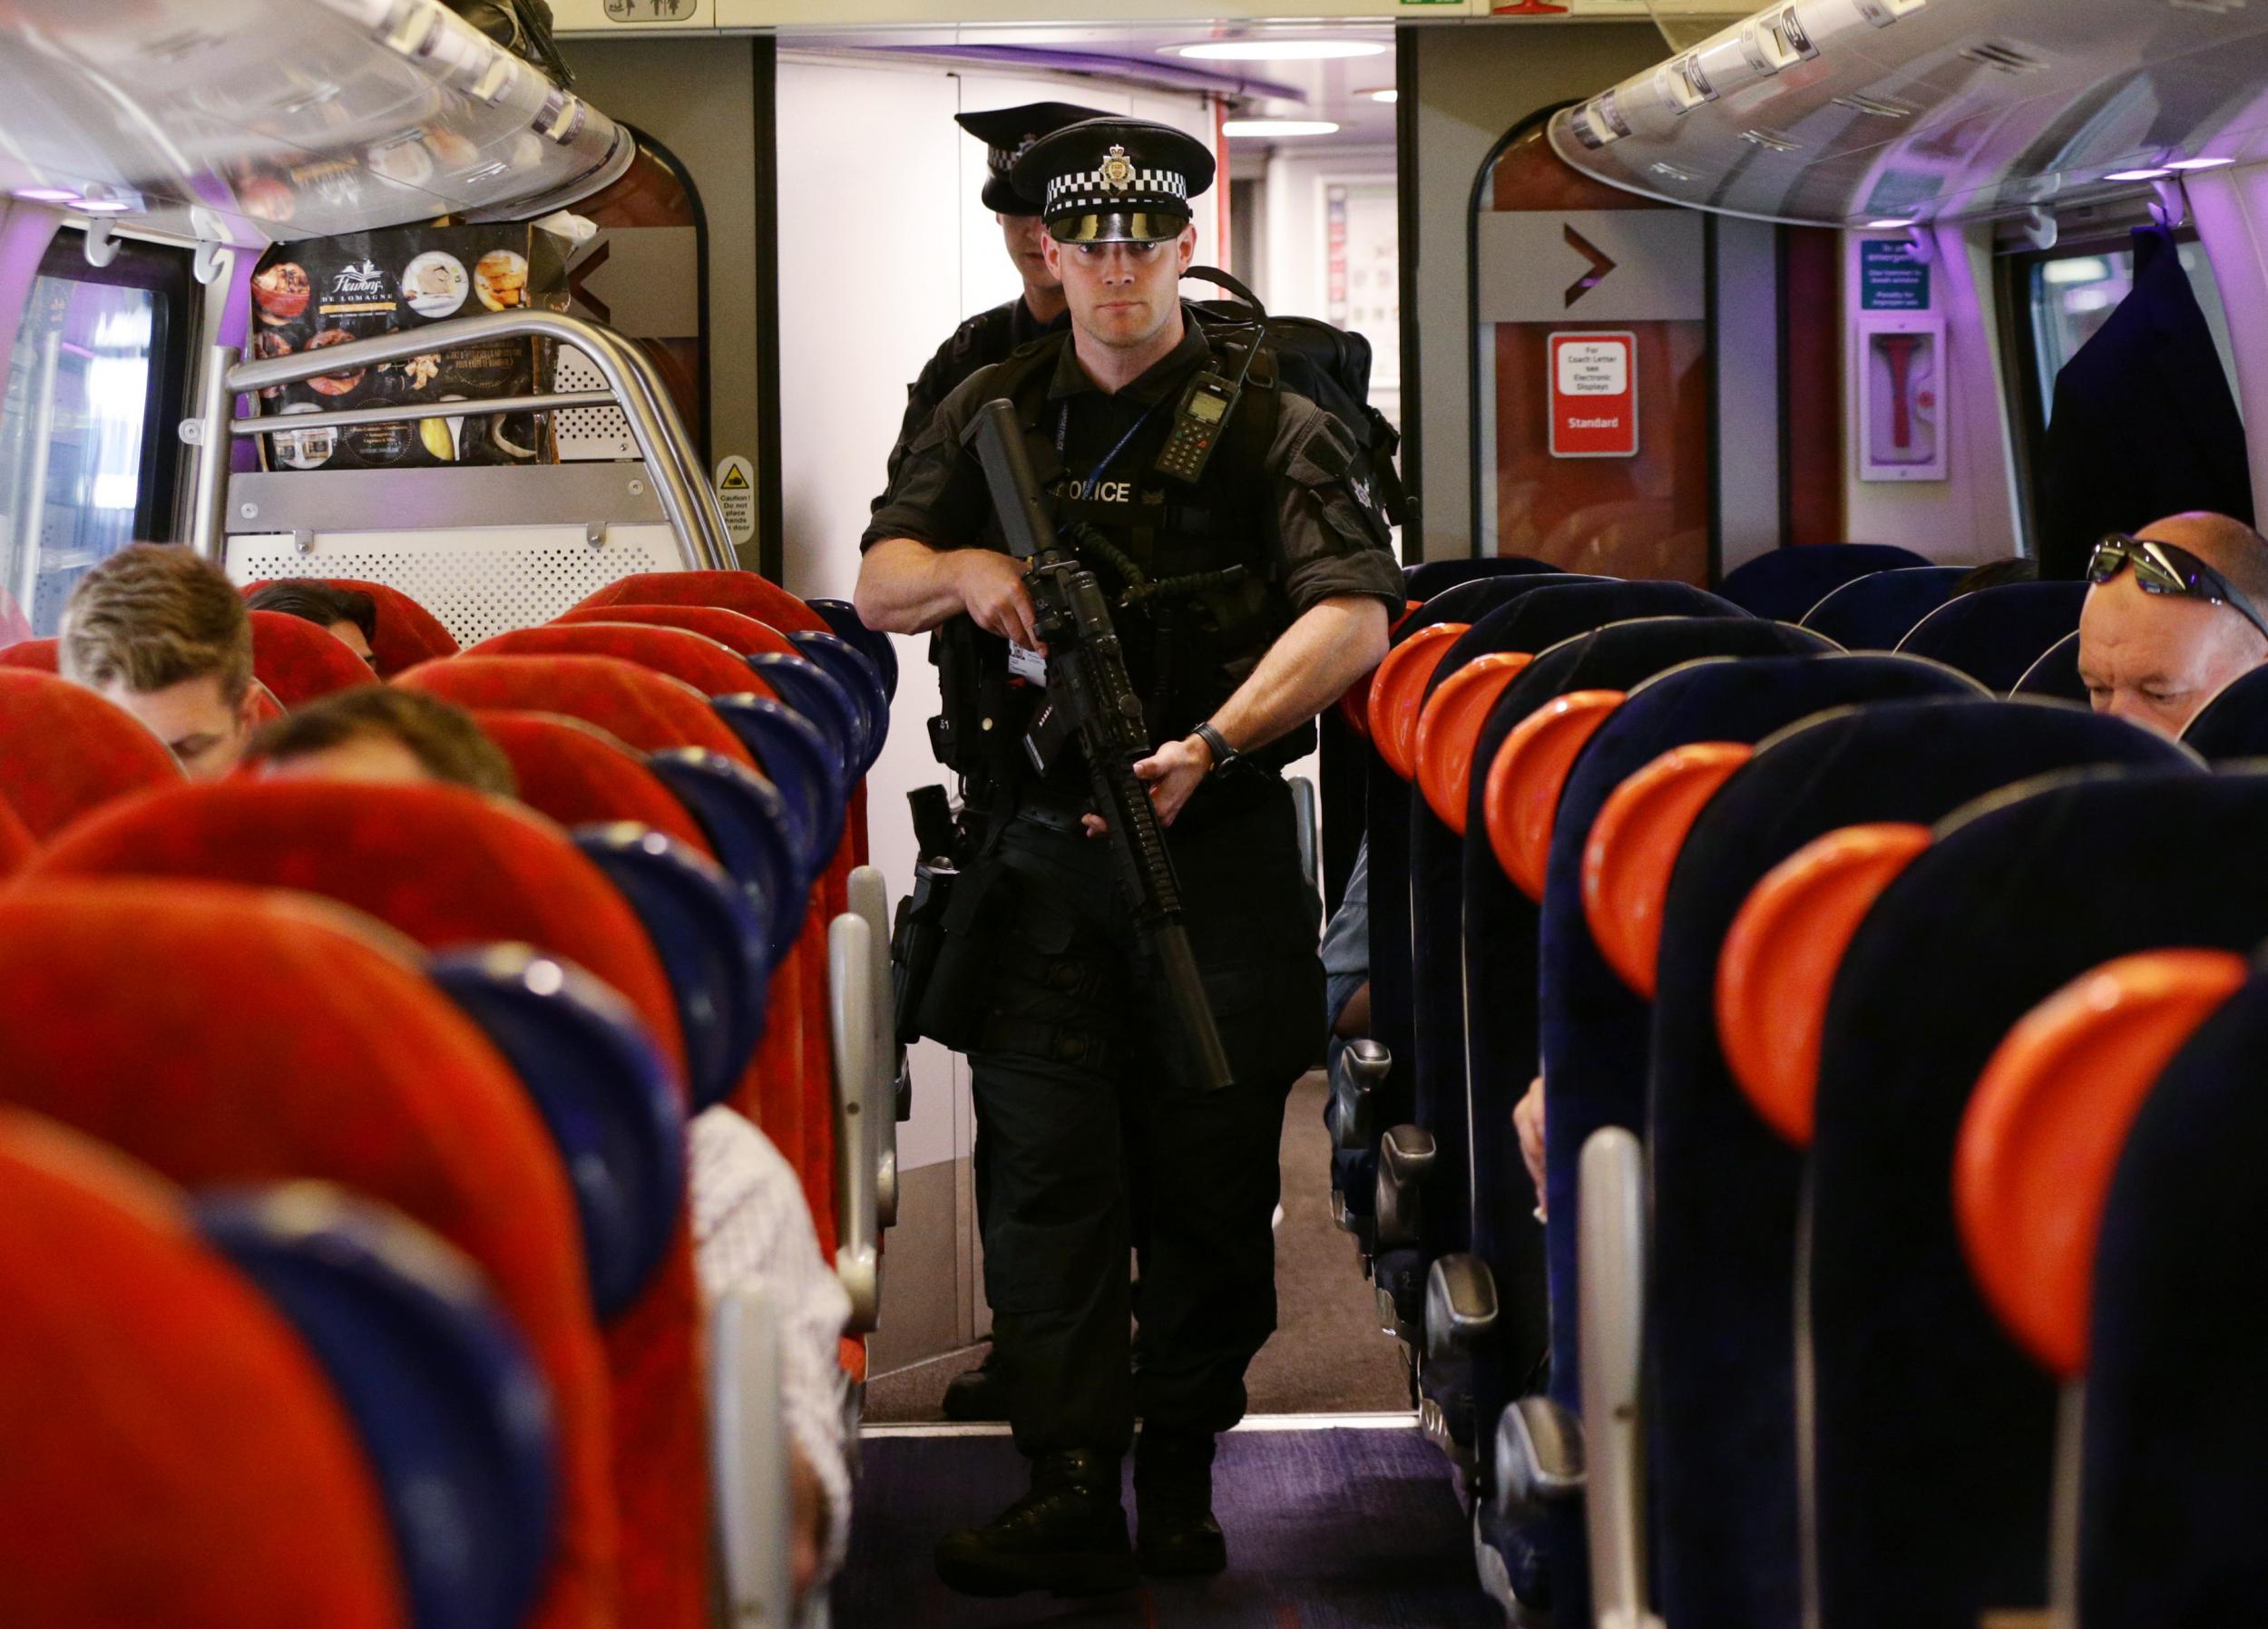 Armed police officers patrol trains nationwide for first time in ...